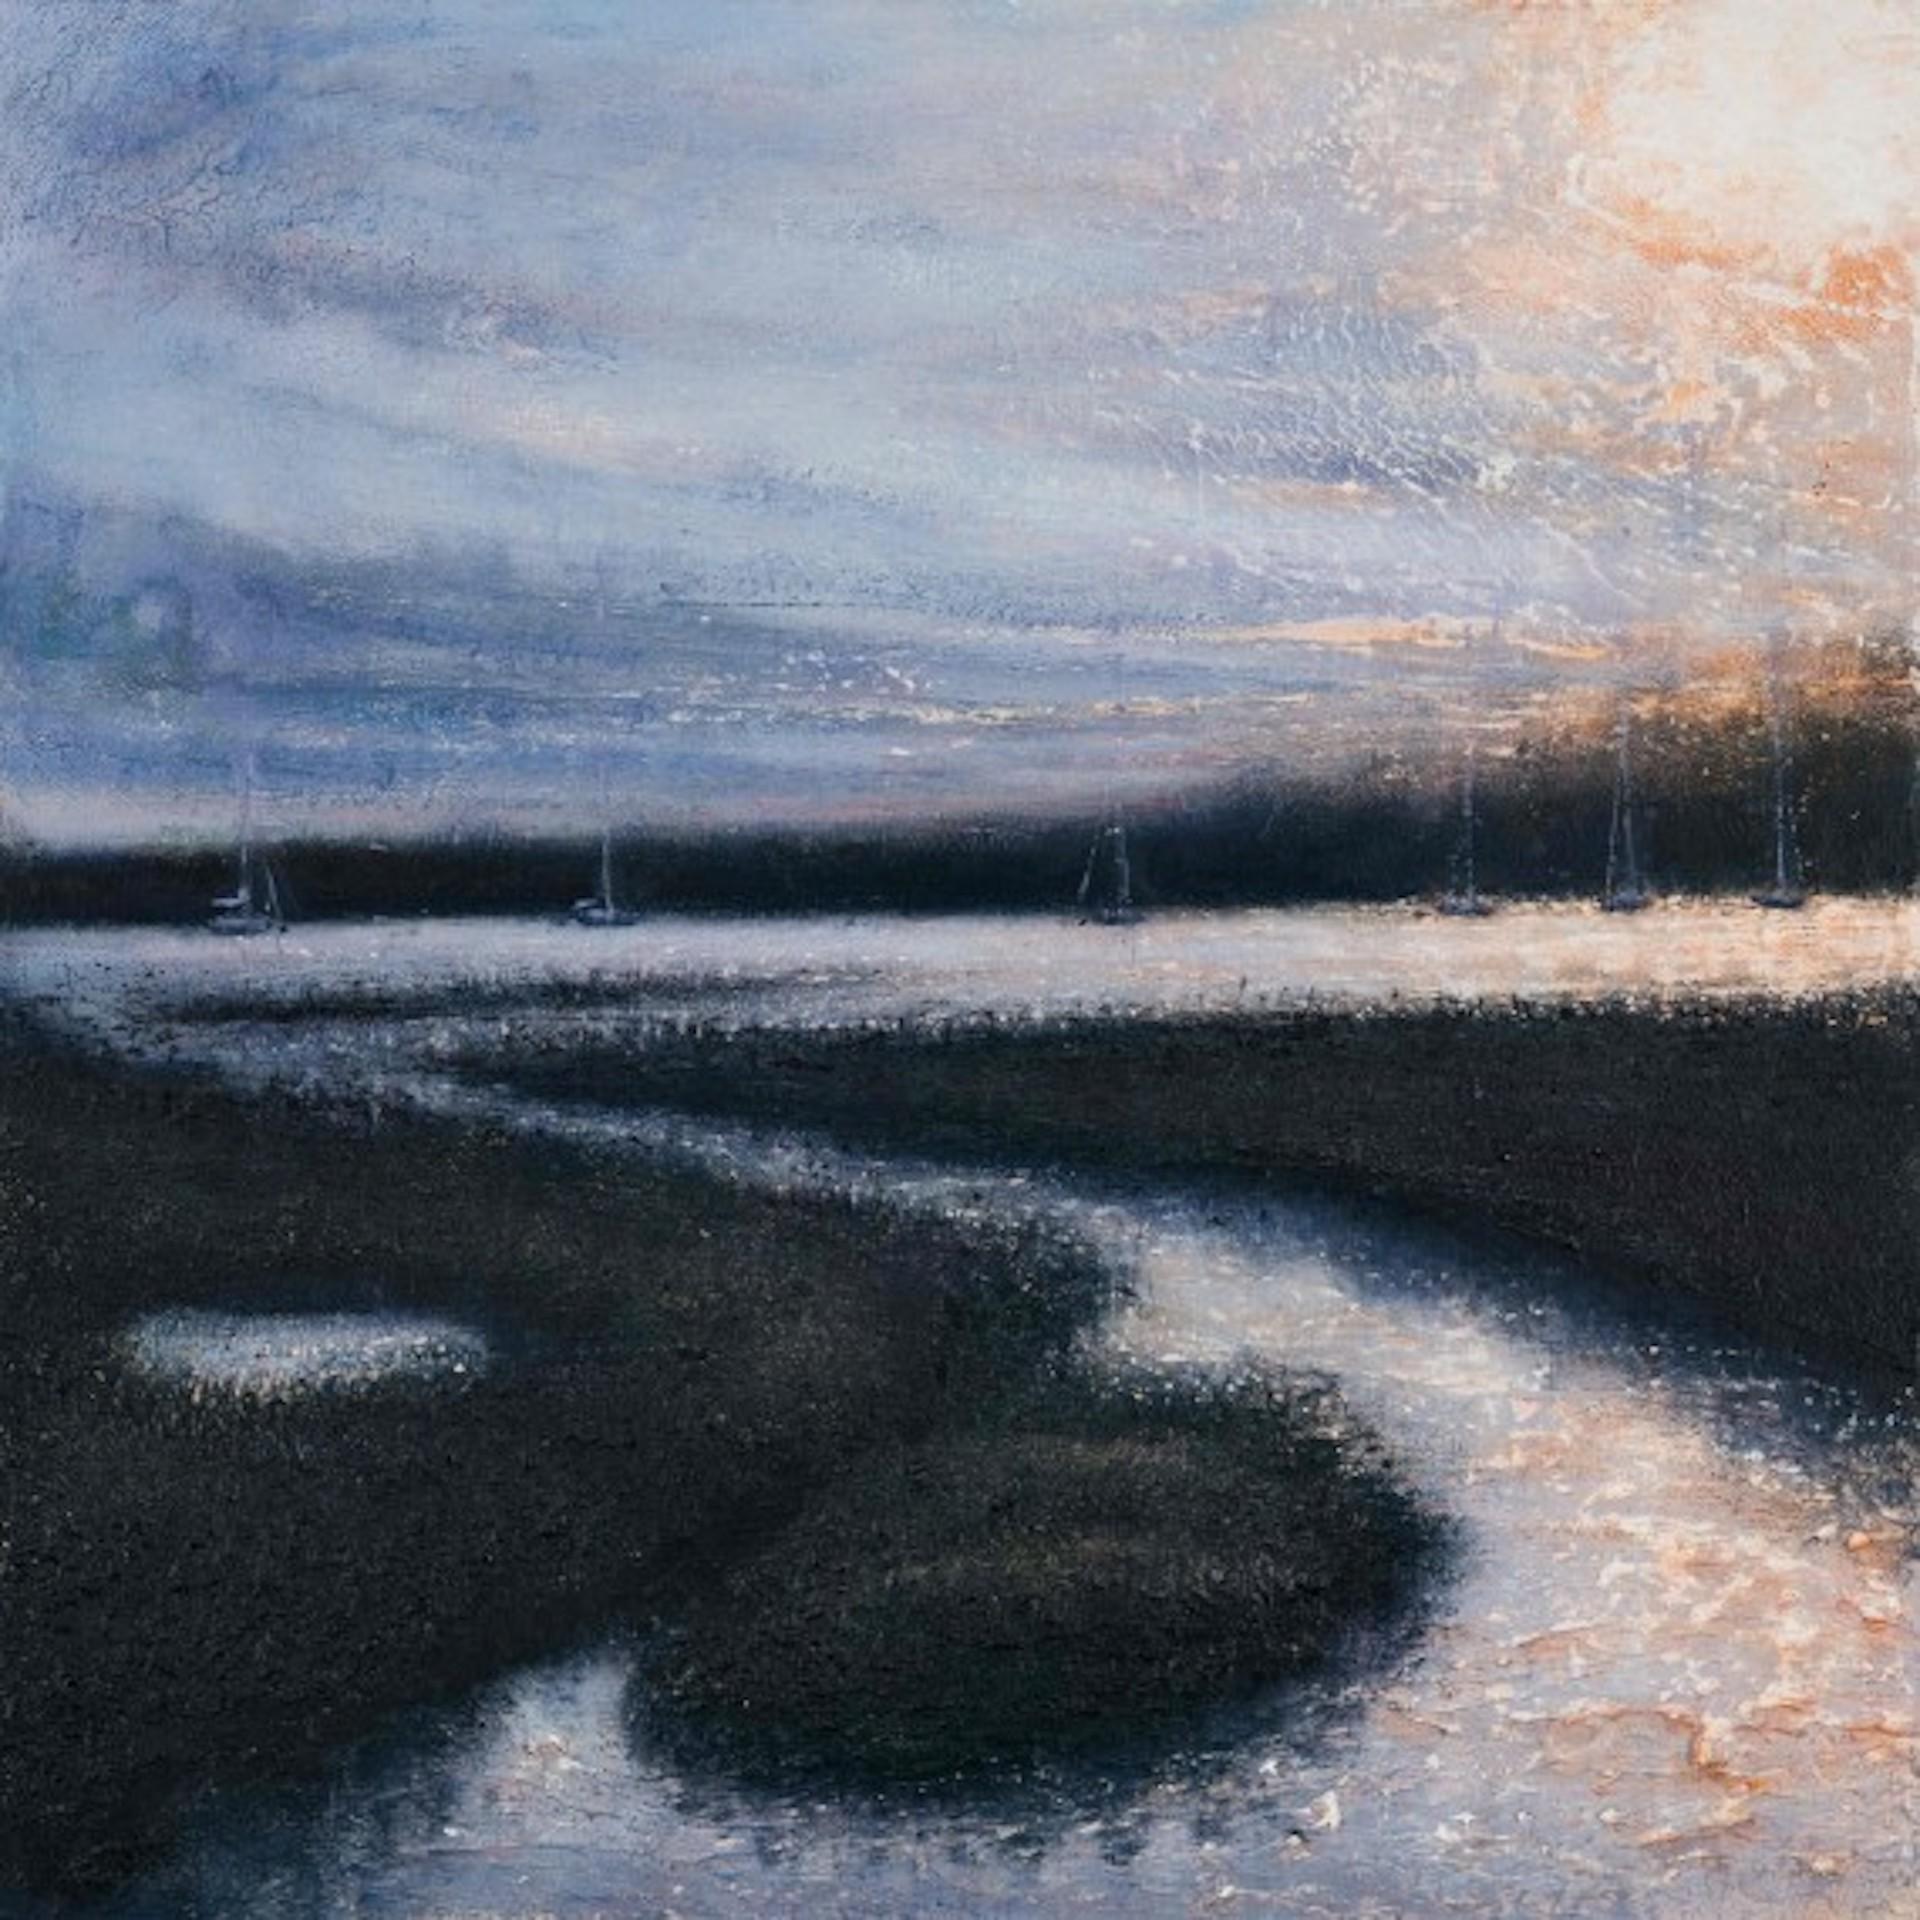 Alison Groom
Wivenhoe Afternoon
Original Textured Landscape Painting
Oil on Textured Acrylic Medium on Board
Board Size H 50 cm x W 50cm x D 2.2cm
Framed Size H 60cm x W 60cm x D 3.2cm
Sold Framed (White Tray Frame Farrow and Ball Ammonite)
Free